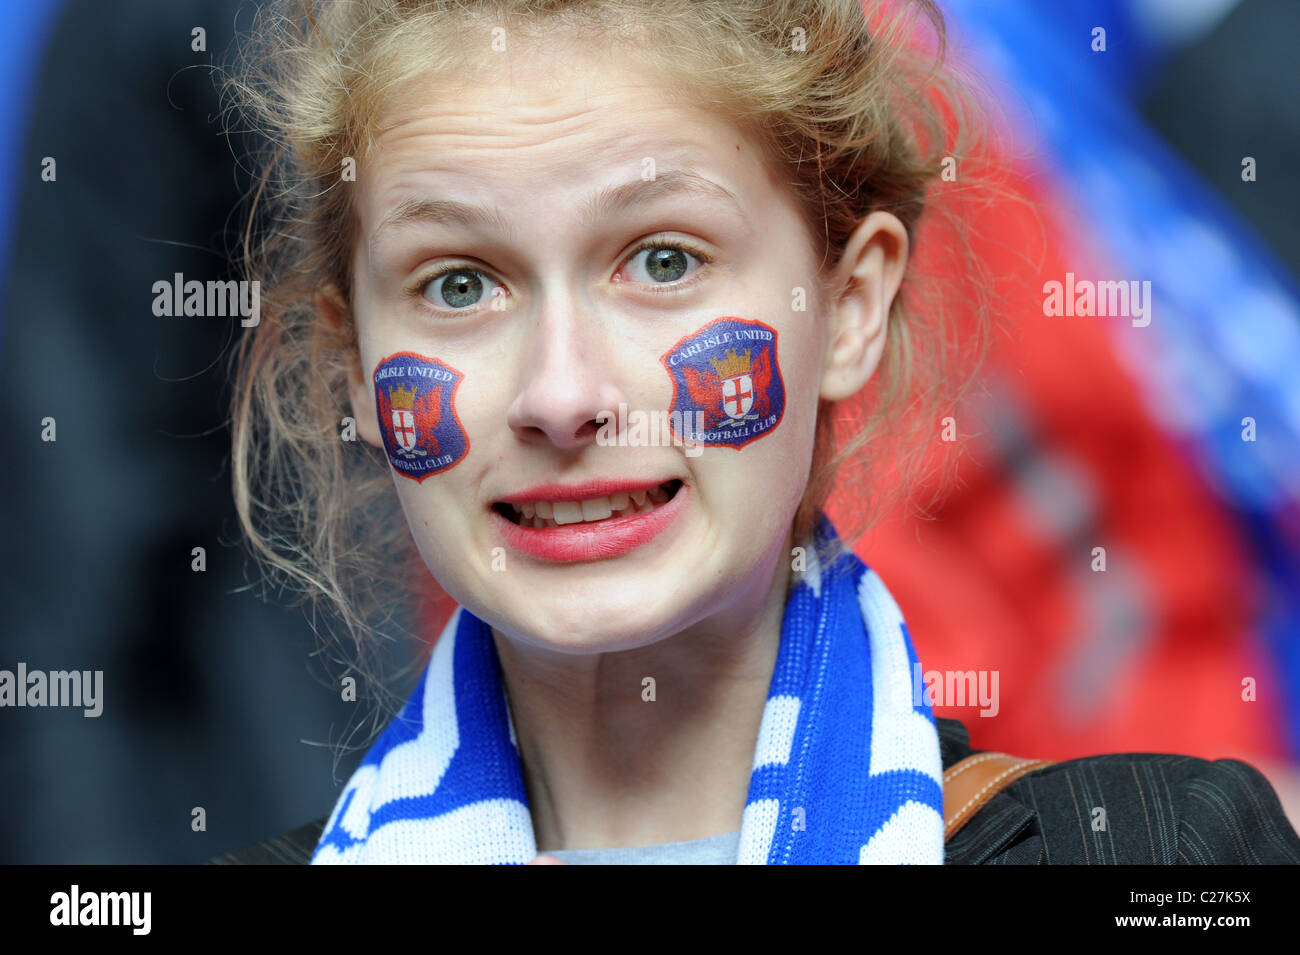 Attractive female football supporter wearing Carlisle United club badge transfers on her face Stock Photo